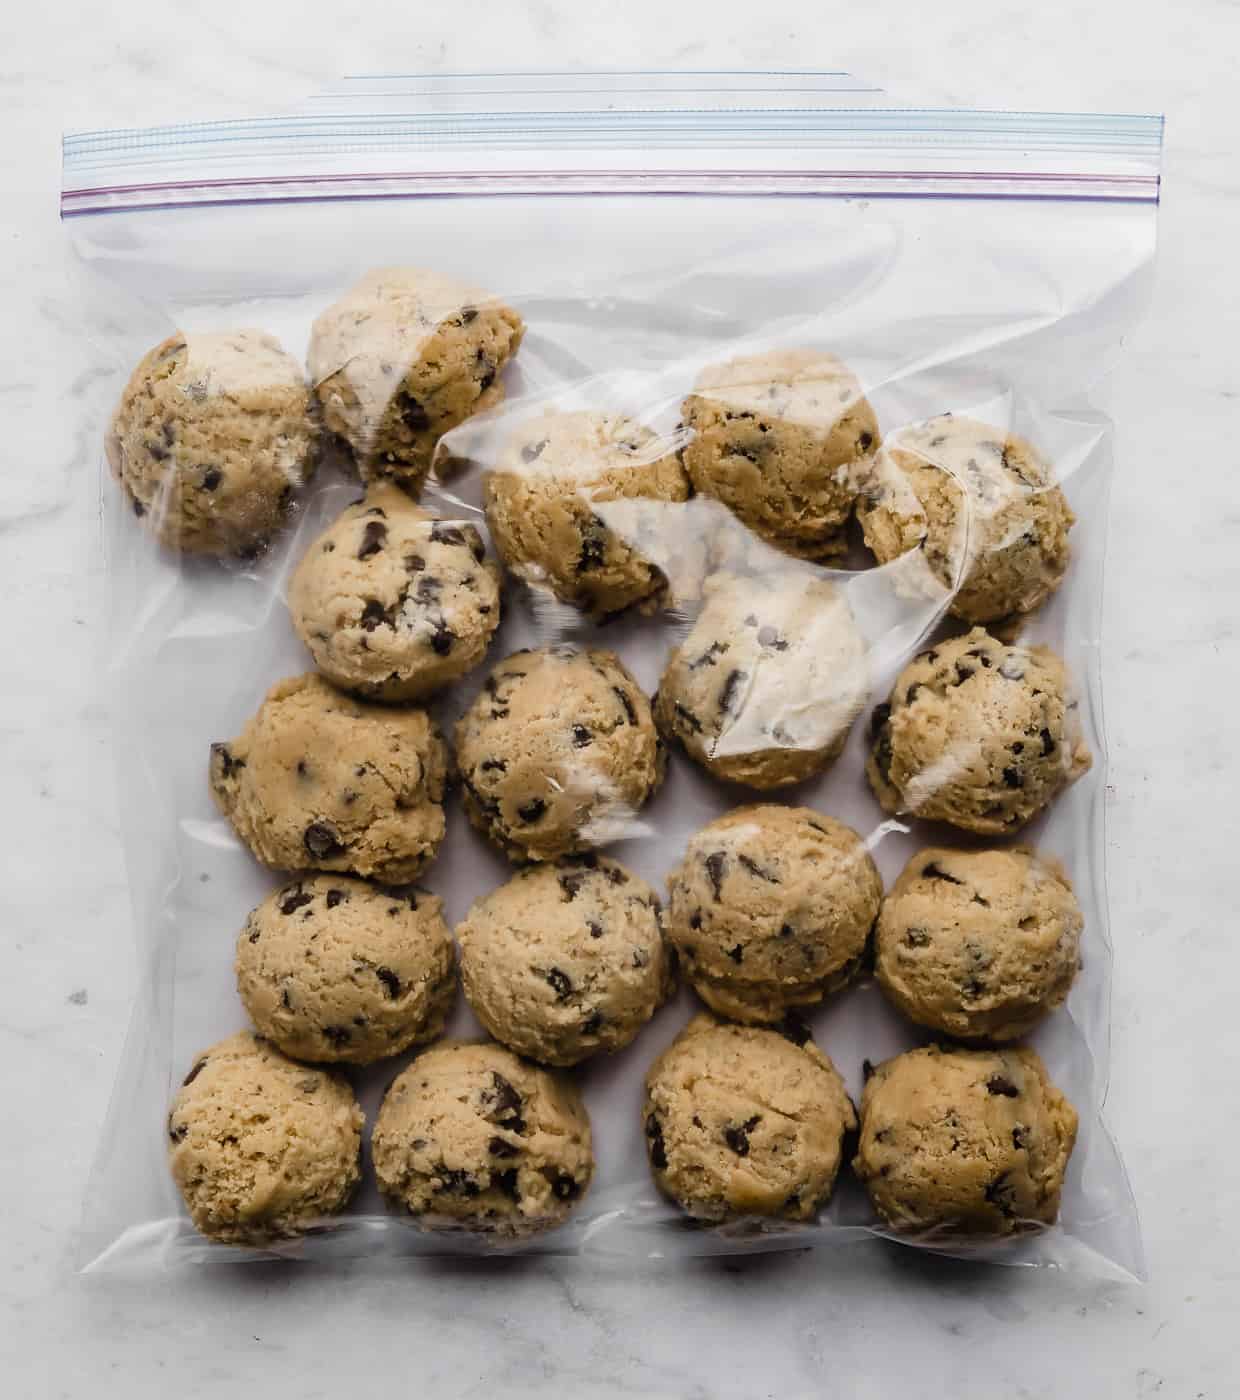 Chocolate chip cookie dough balls in a ziplock bag on a white background.